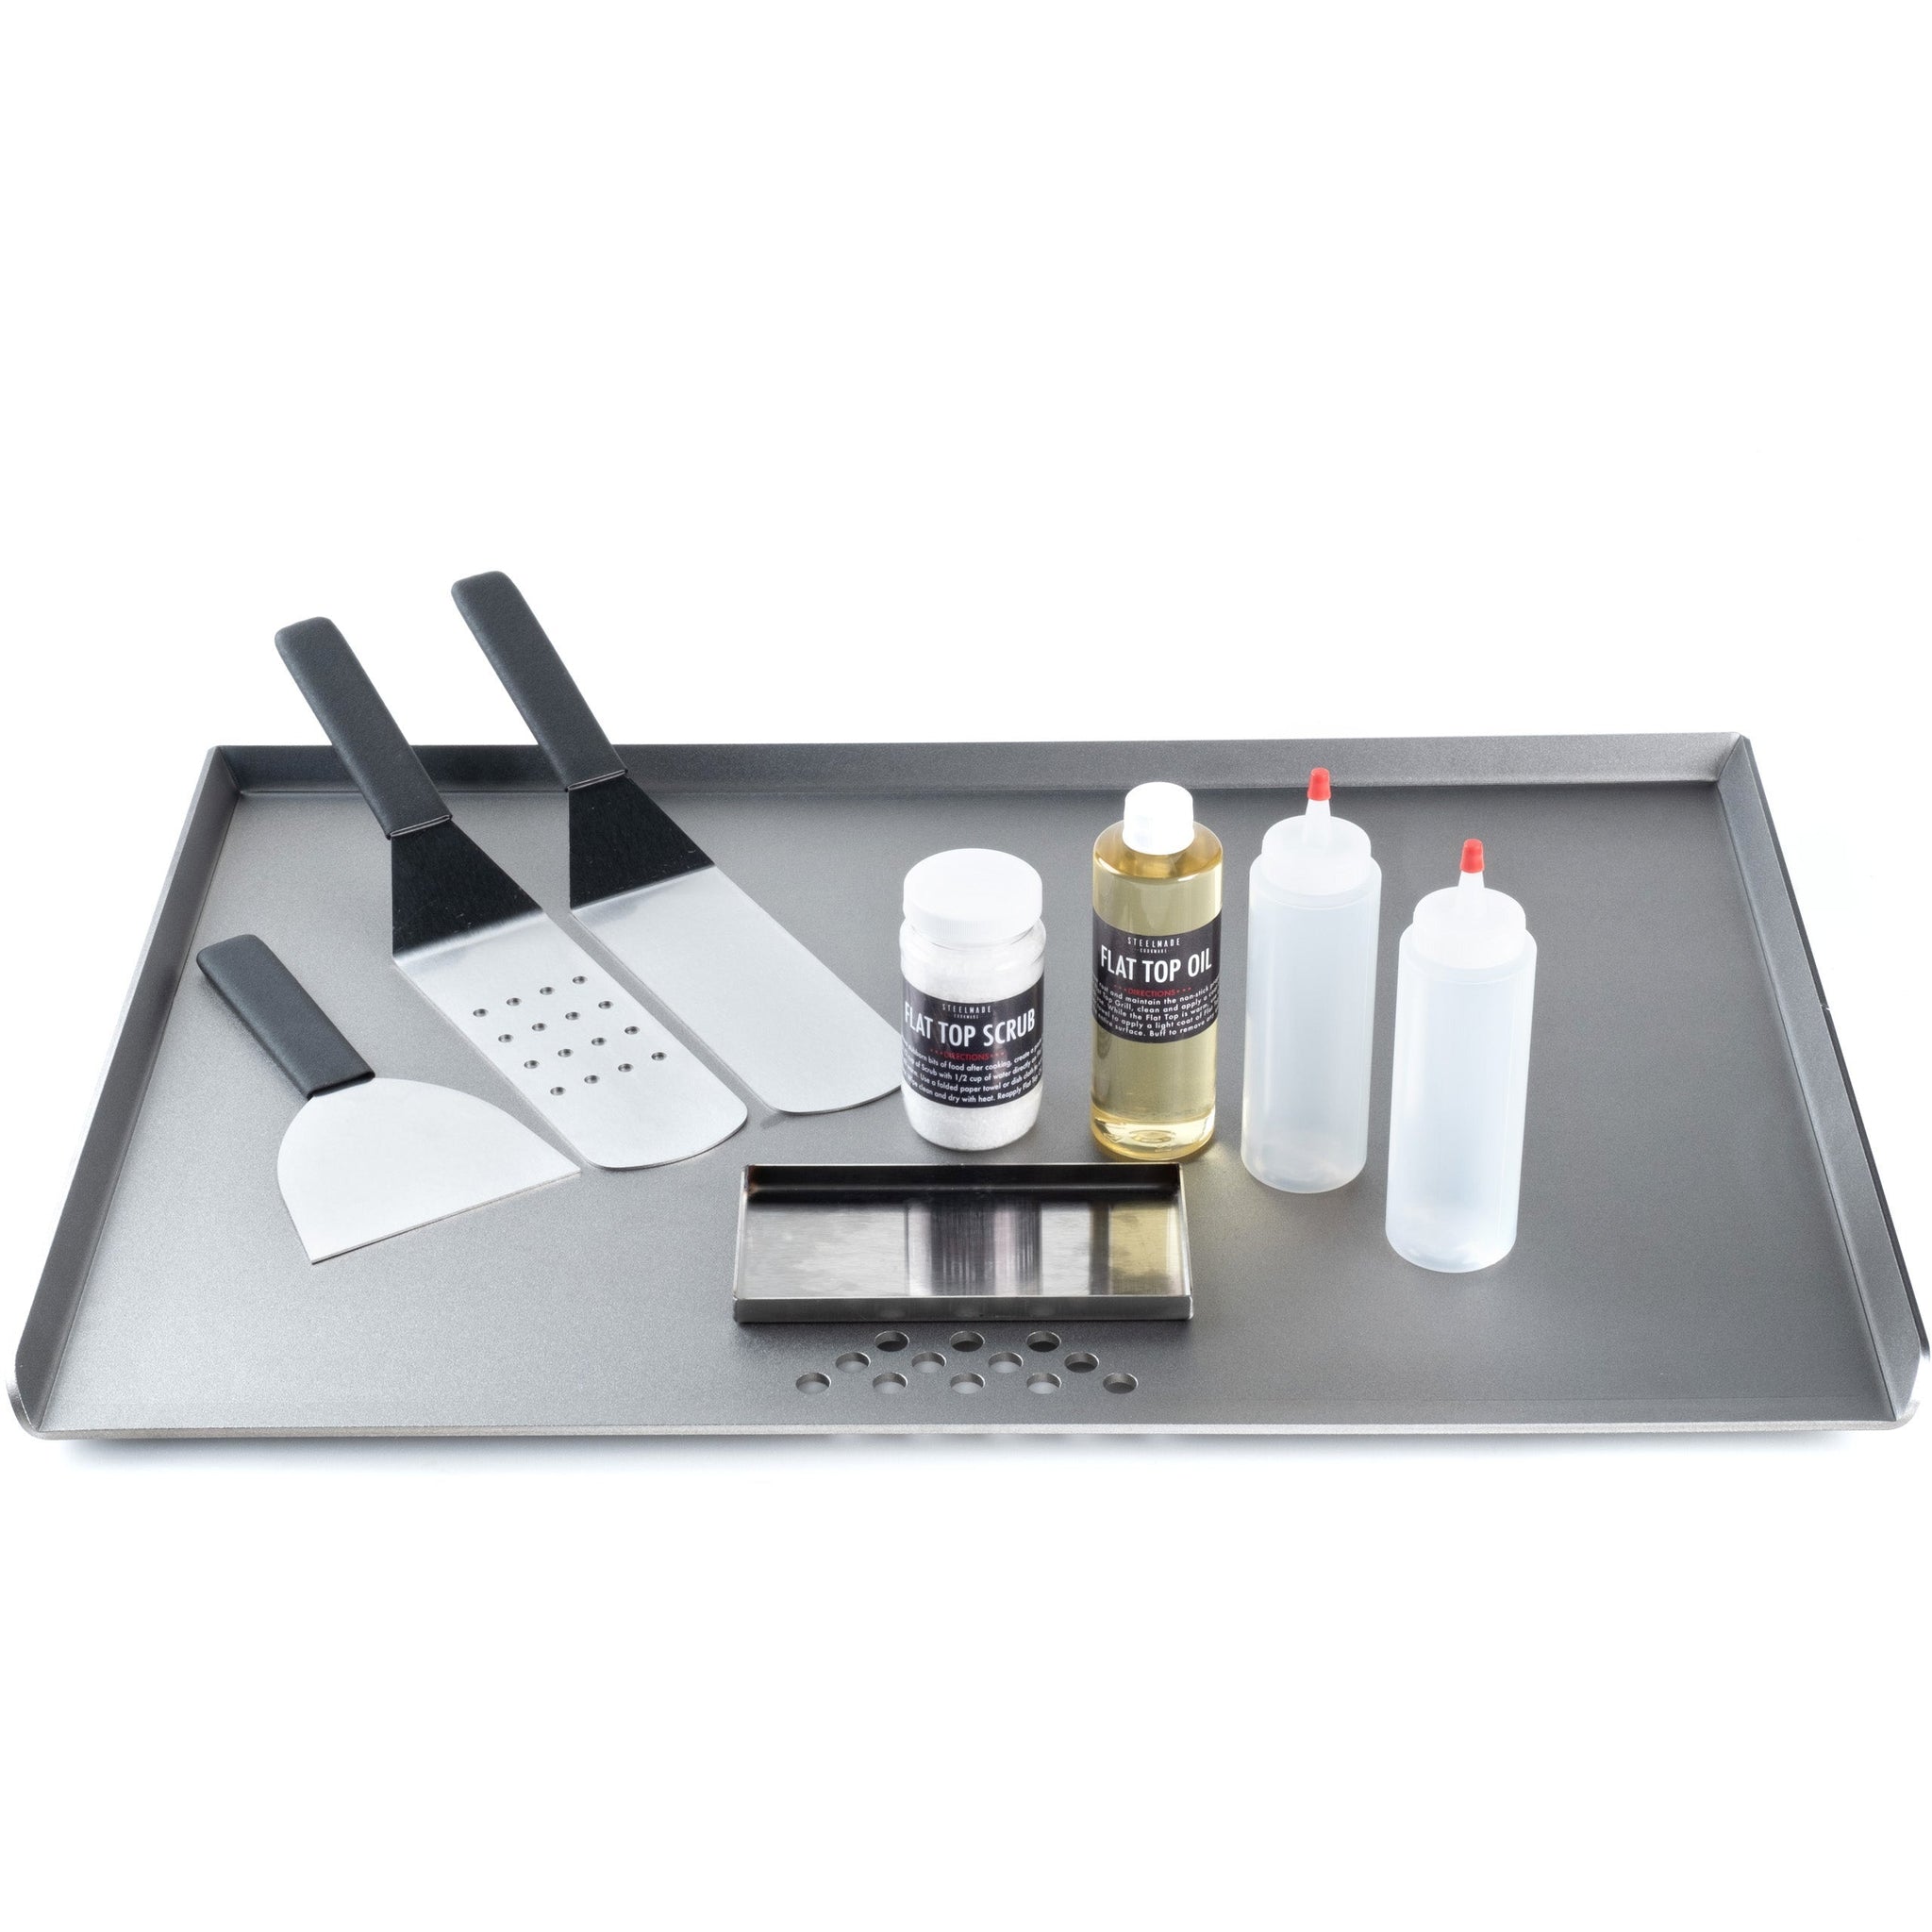 Stove Flat Top Griddle for Gas or Electric Coil Range by Steelmade USA